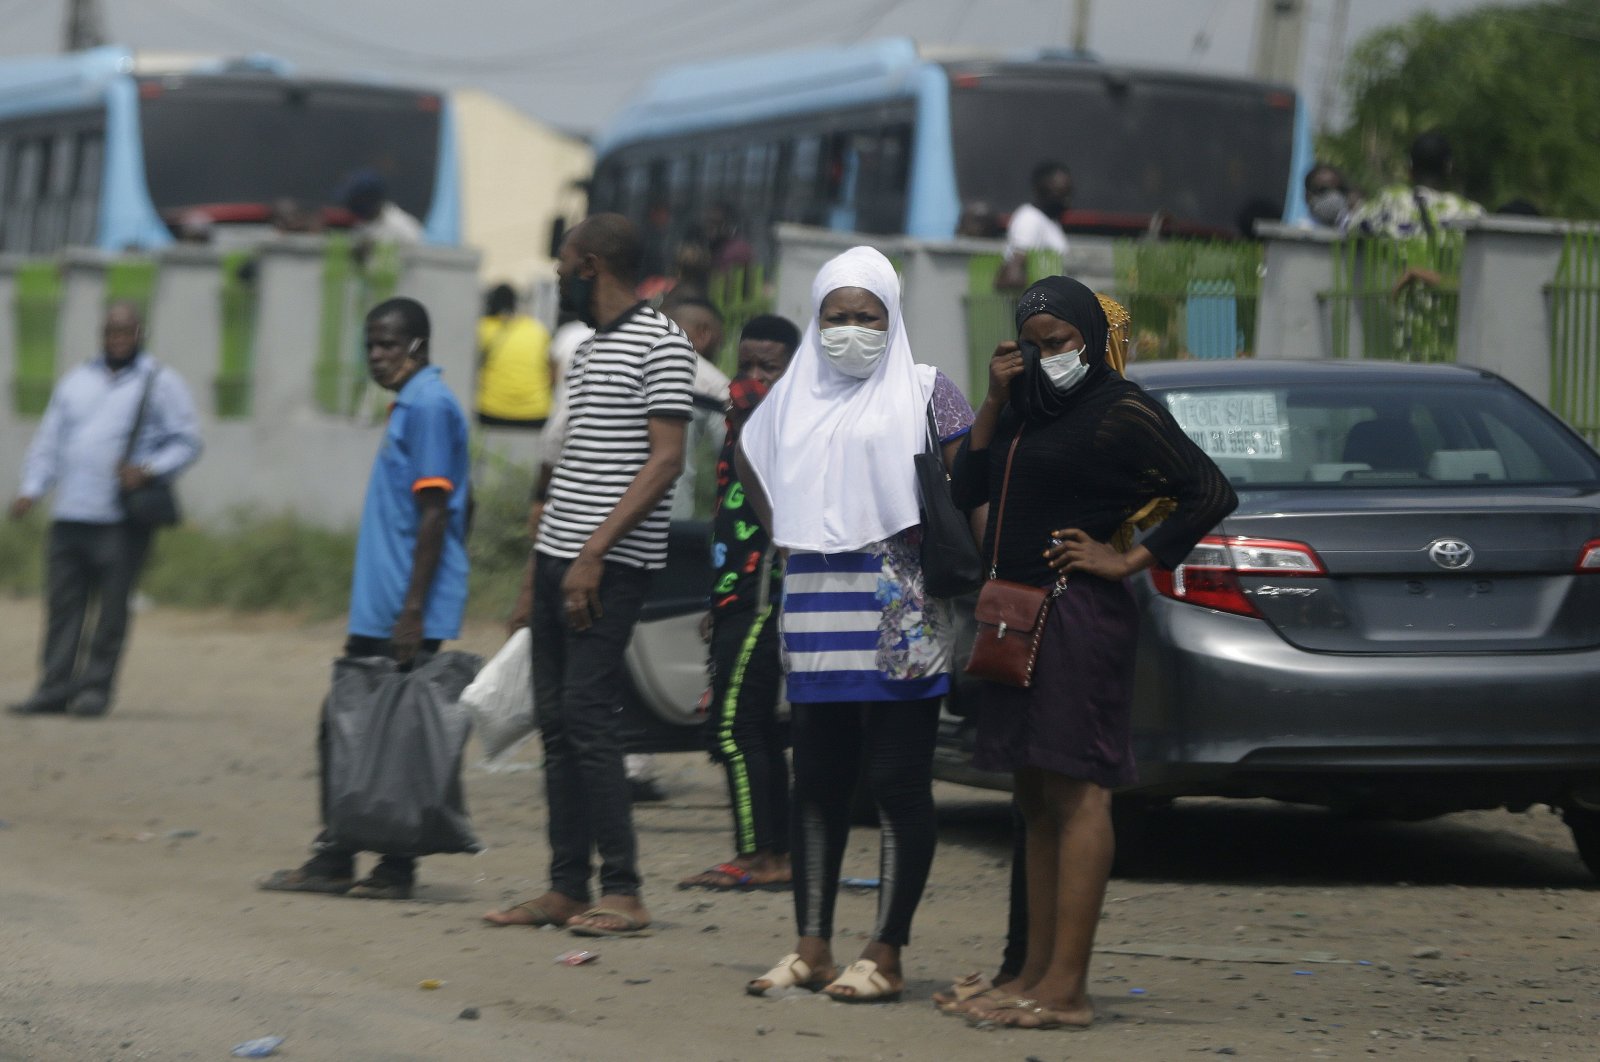 People wearing face masks to protect against the coronavirus wait for a commercial bus, Lagos, May 20, 2020. (AP Photo)